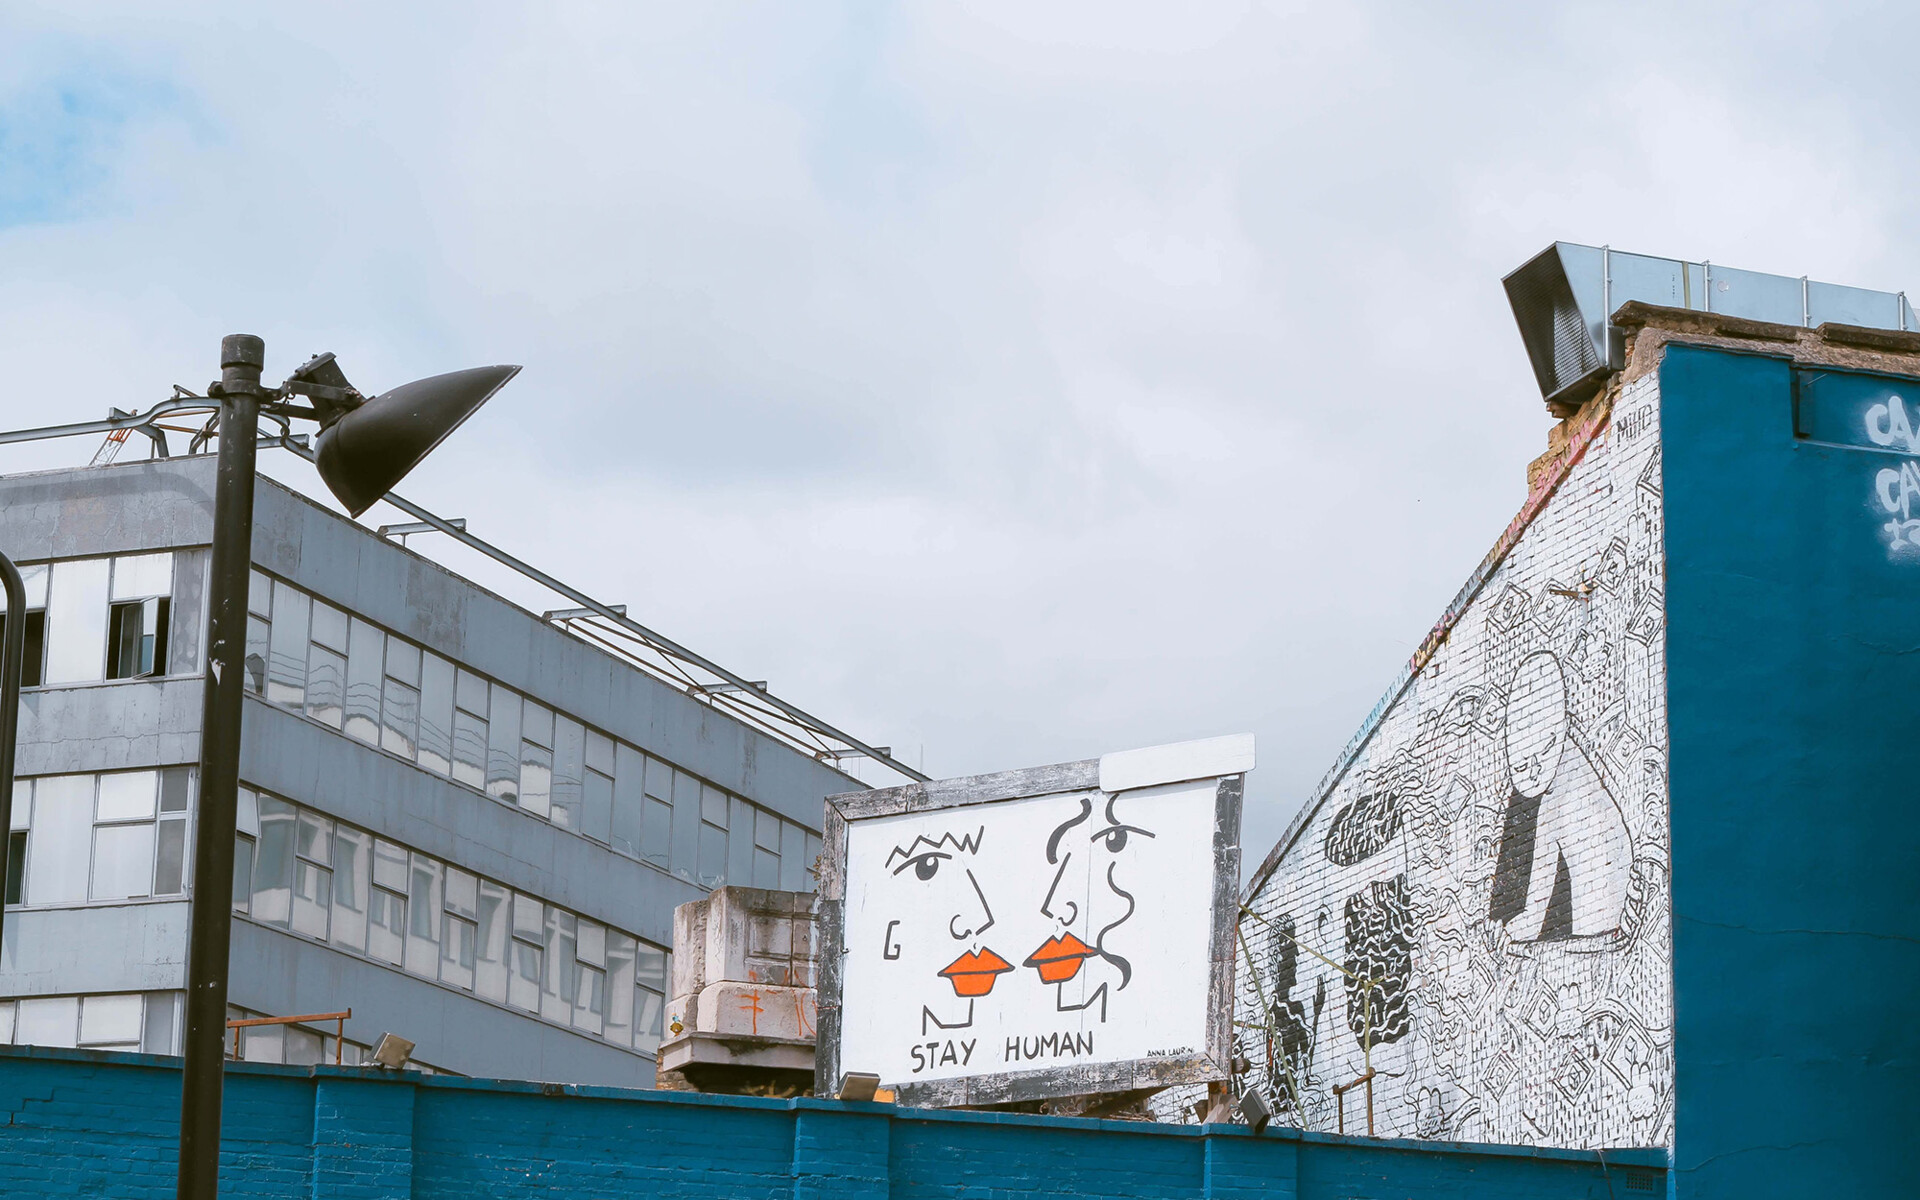 Cover picture at politischbilden.de: an old industrial building with a graffiti of kissing faces